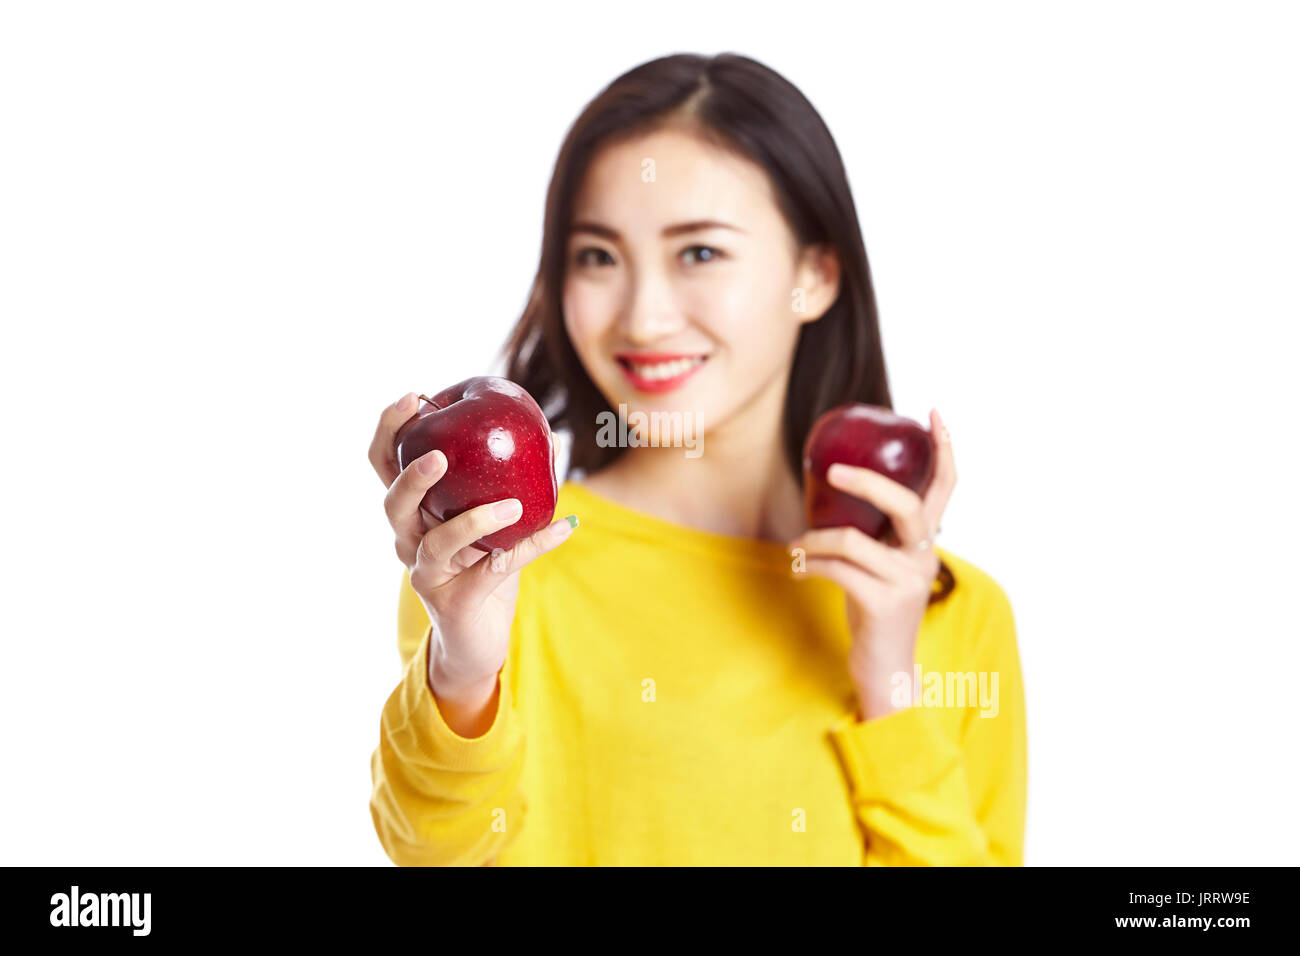 young and beautiful asian woman showing two red apples, isolated on white background, healthy eating concept. Stock Photo